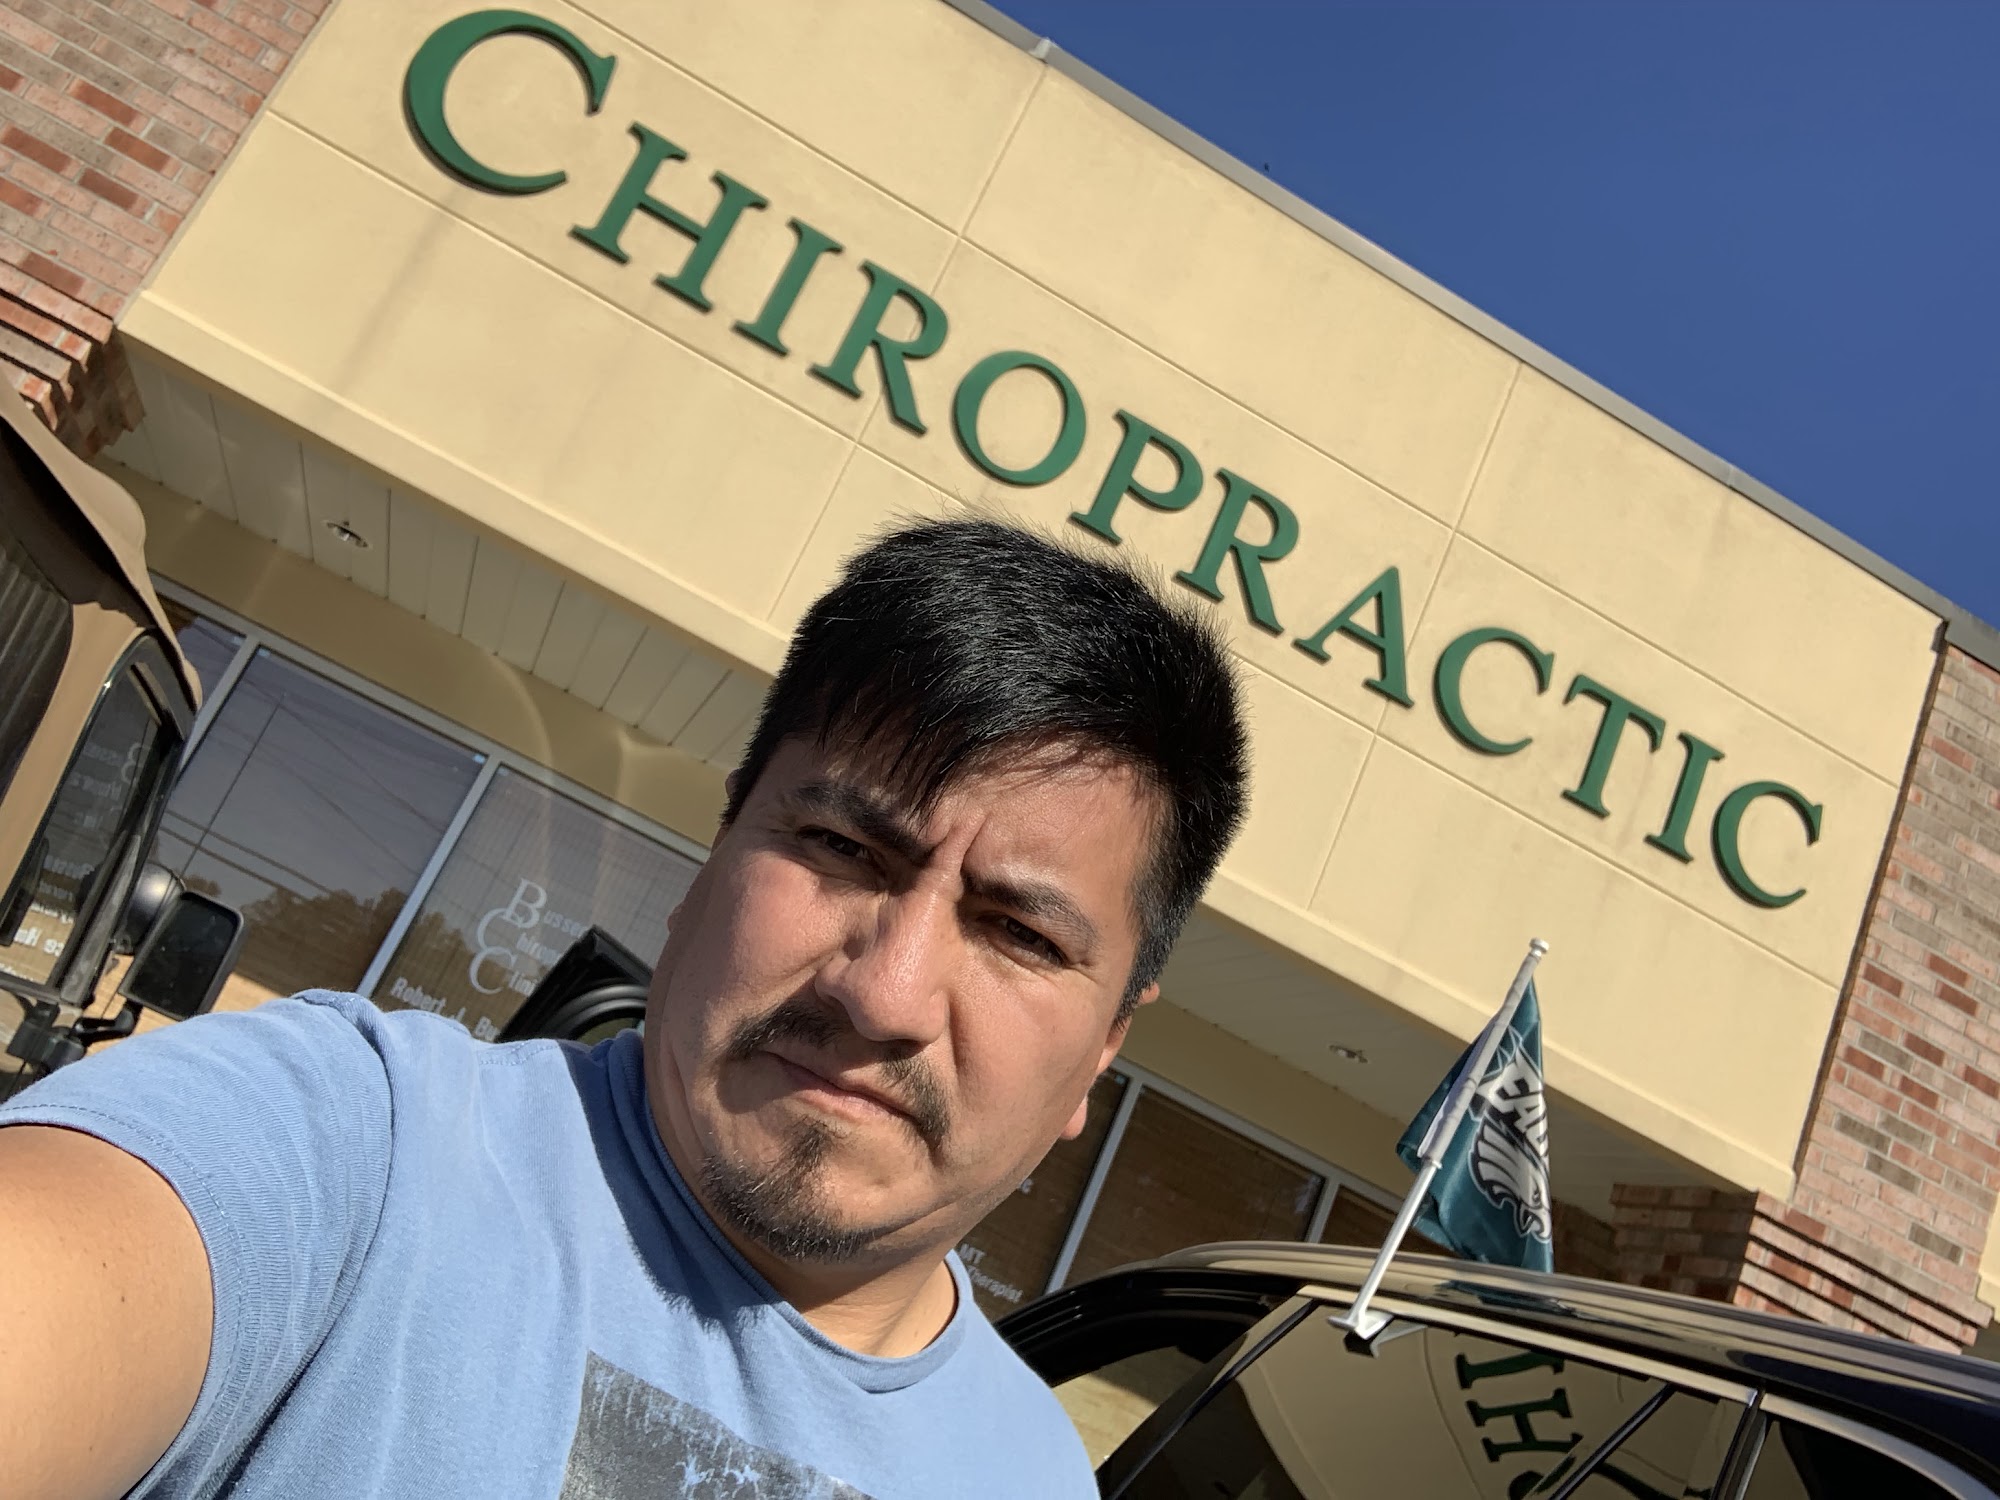 Bussenger Chiropractic Clinic 7085 US-64 #3, Oakland Tennessee 38060